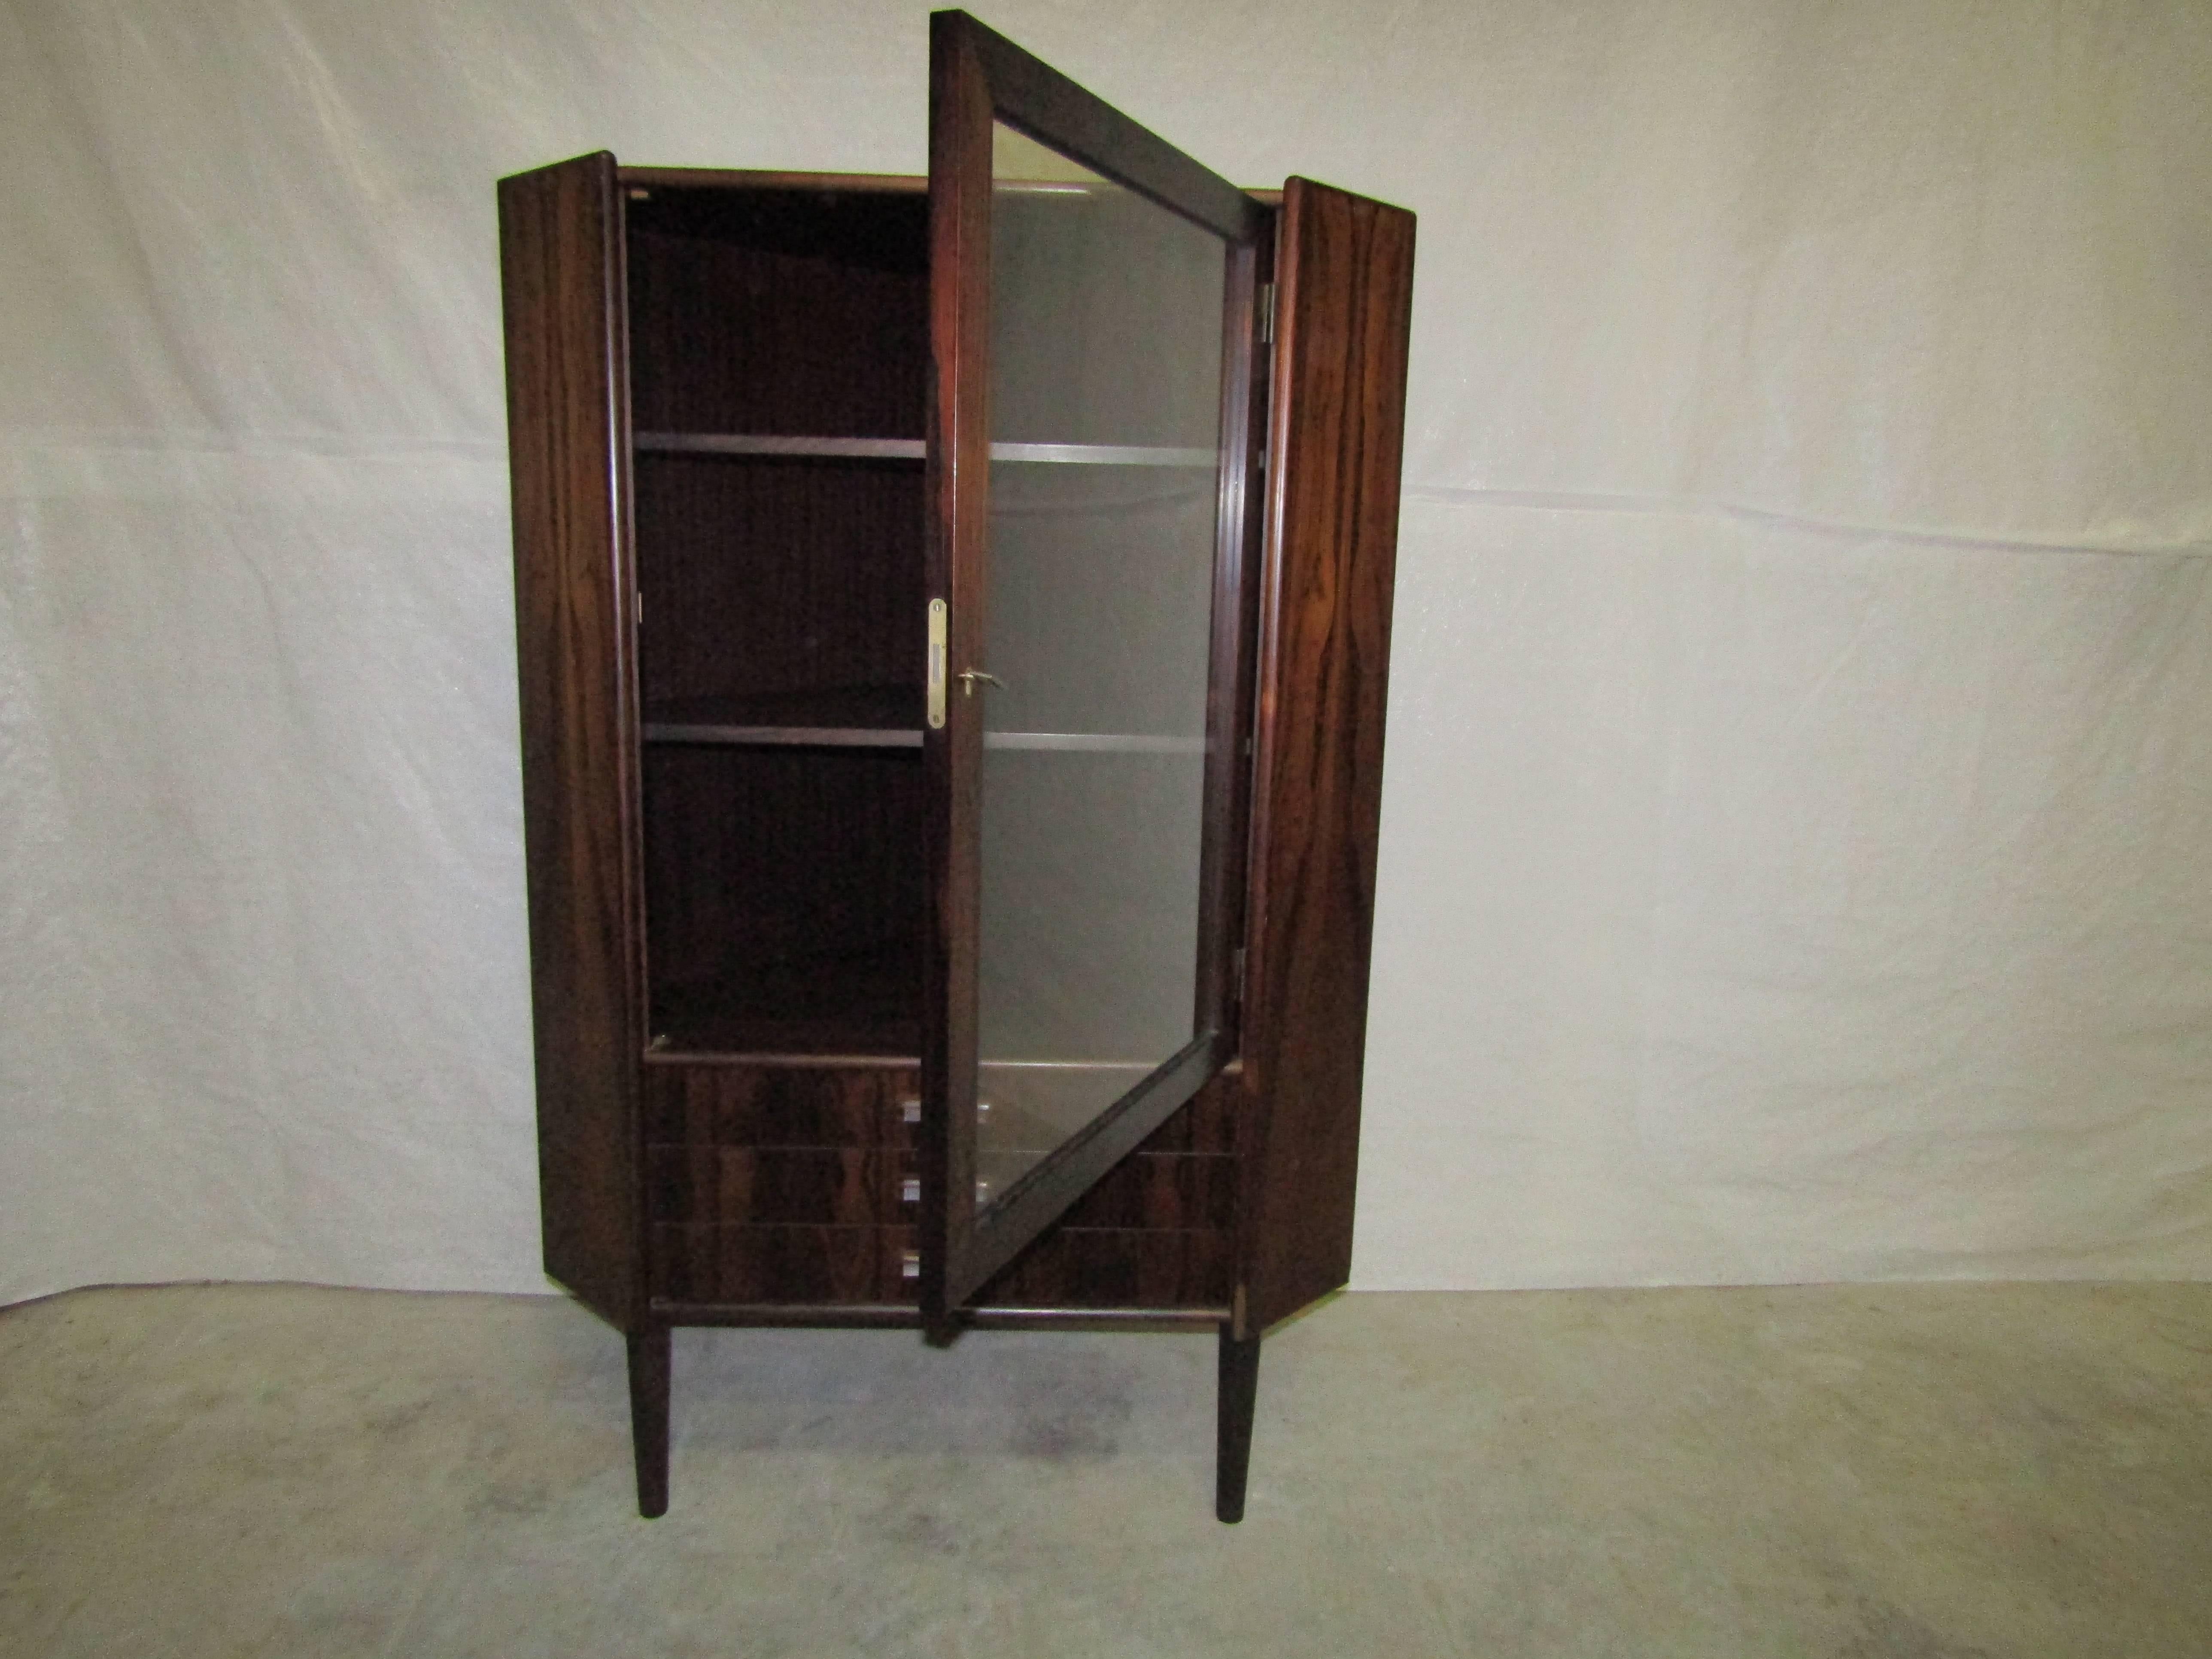 Stunning rosewood corner cabinet from Denmark. Featuring glass doors, two shelves and dovetail joints.